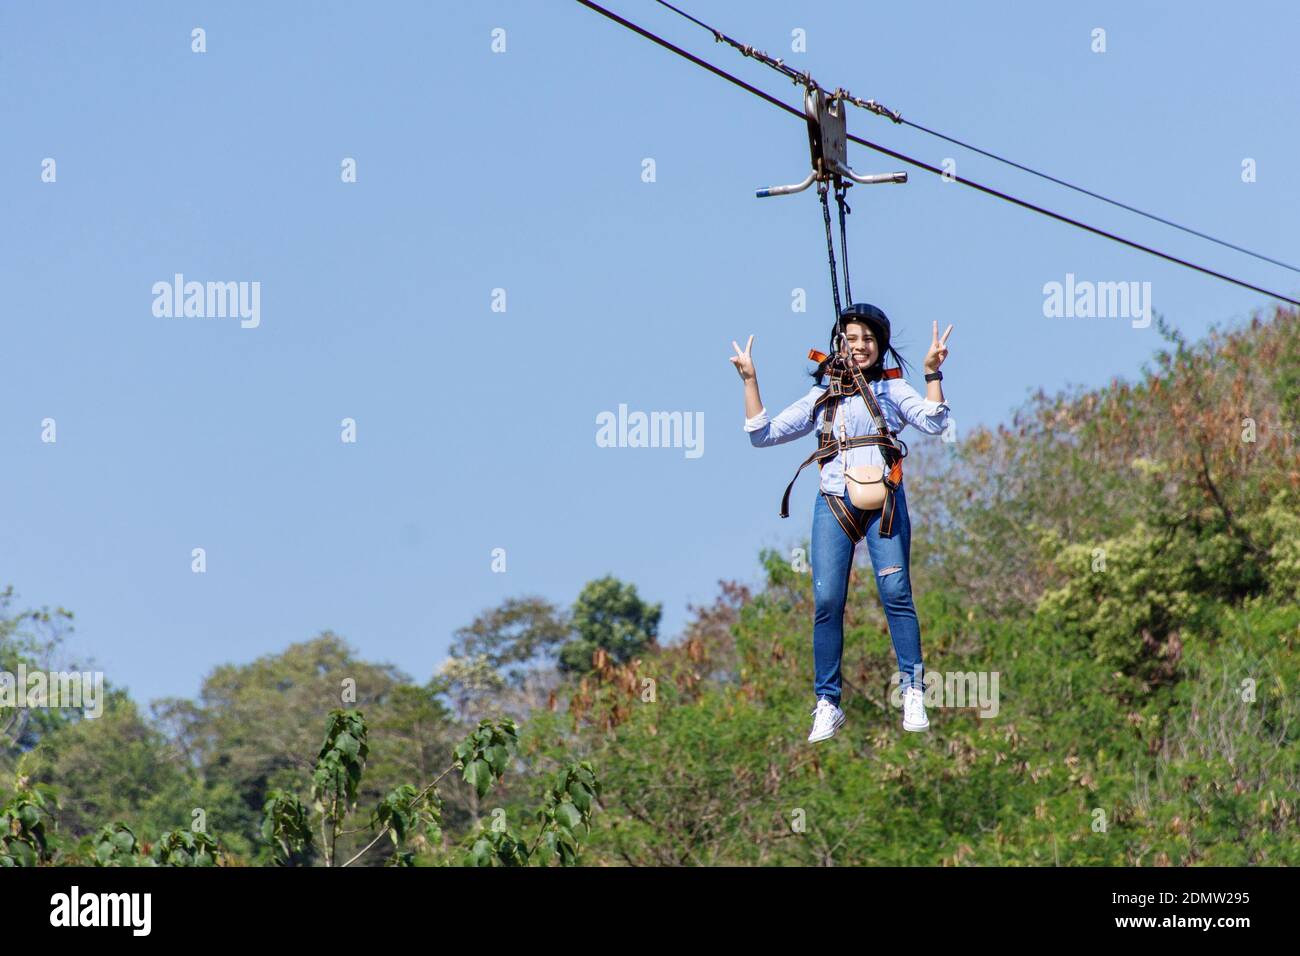 Portrait Of Woman Hanging From Safety Harness While Rappelling Against Sky  Stock Photo - Alamy